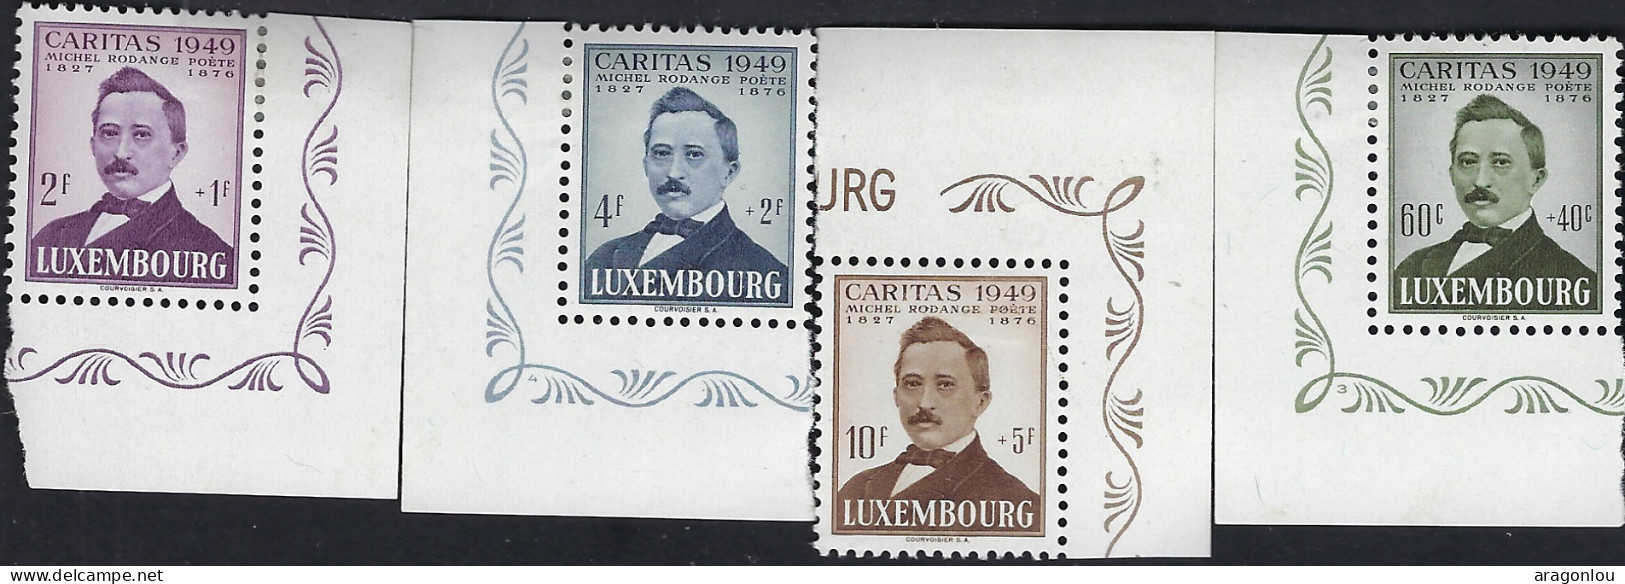 Luxembourg - Luxemburg - 1949   Michel Rodange   Caritas   Série  * - Used Stamps